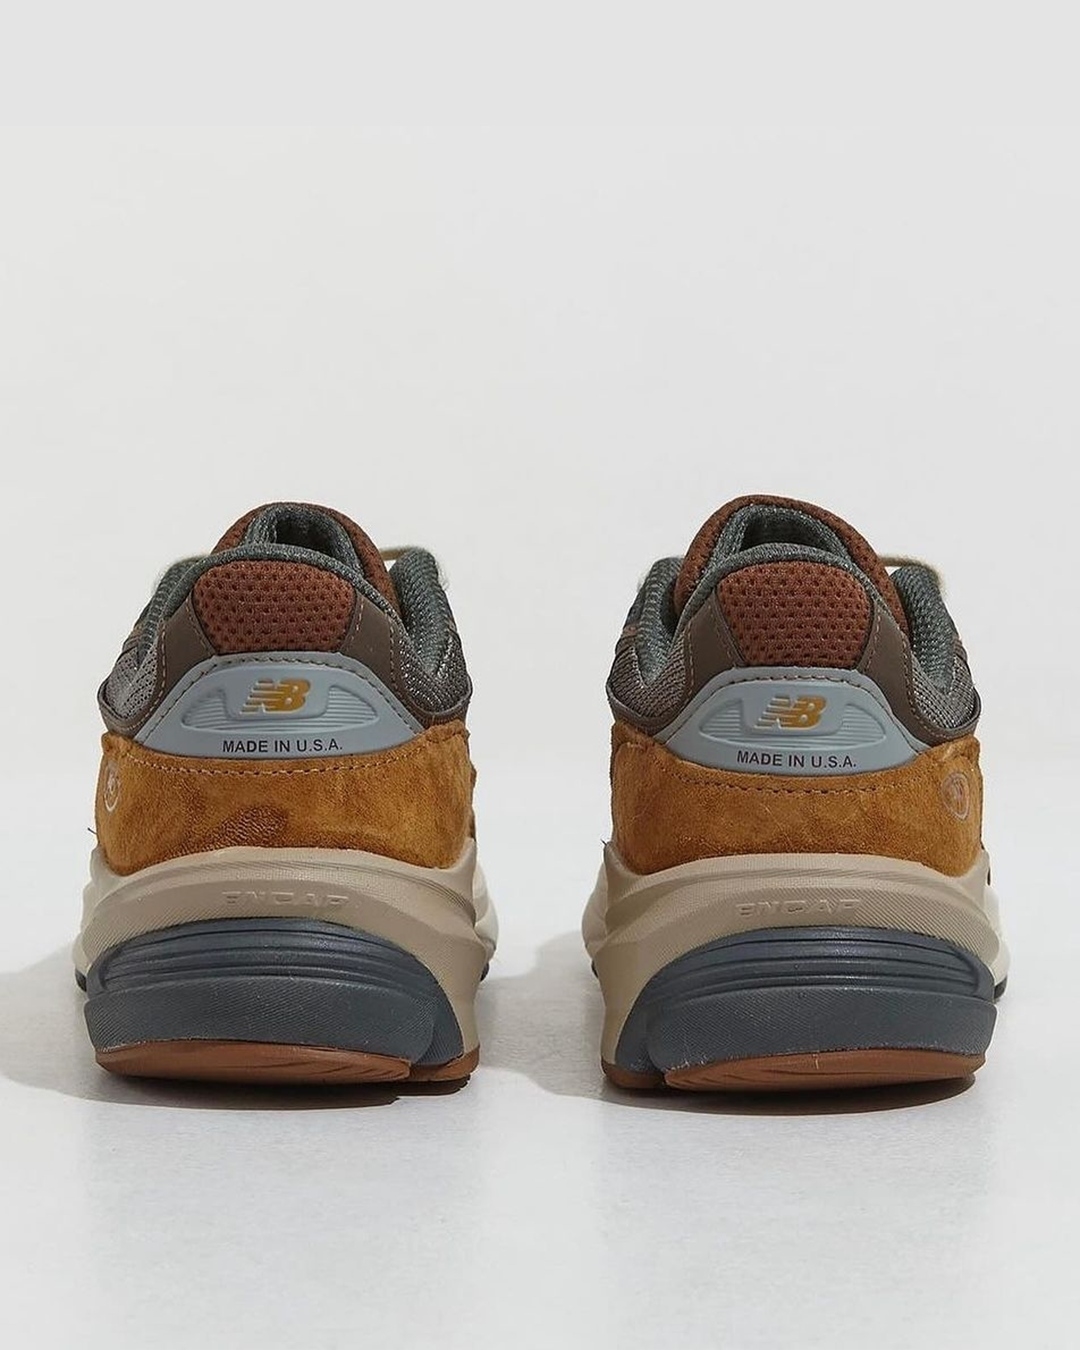 Carhartt WIP x New Balance 990v6 Collab Release Date | Complex